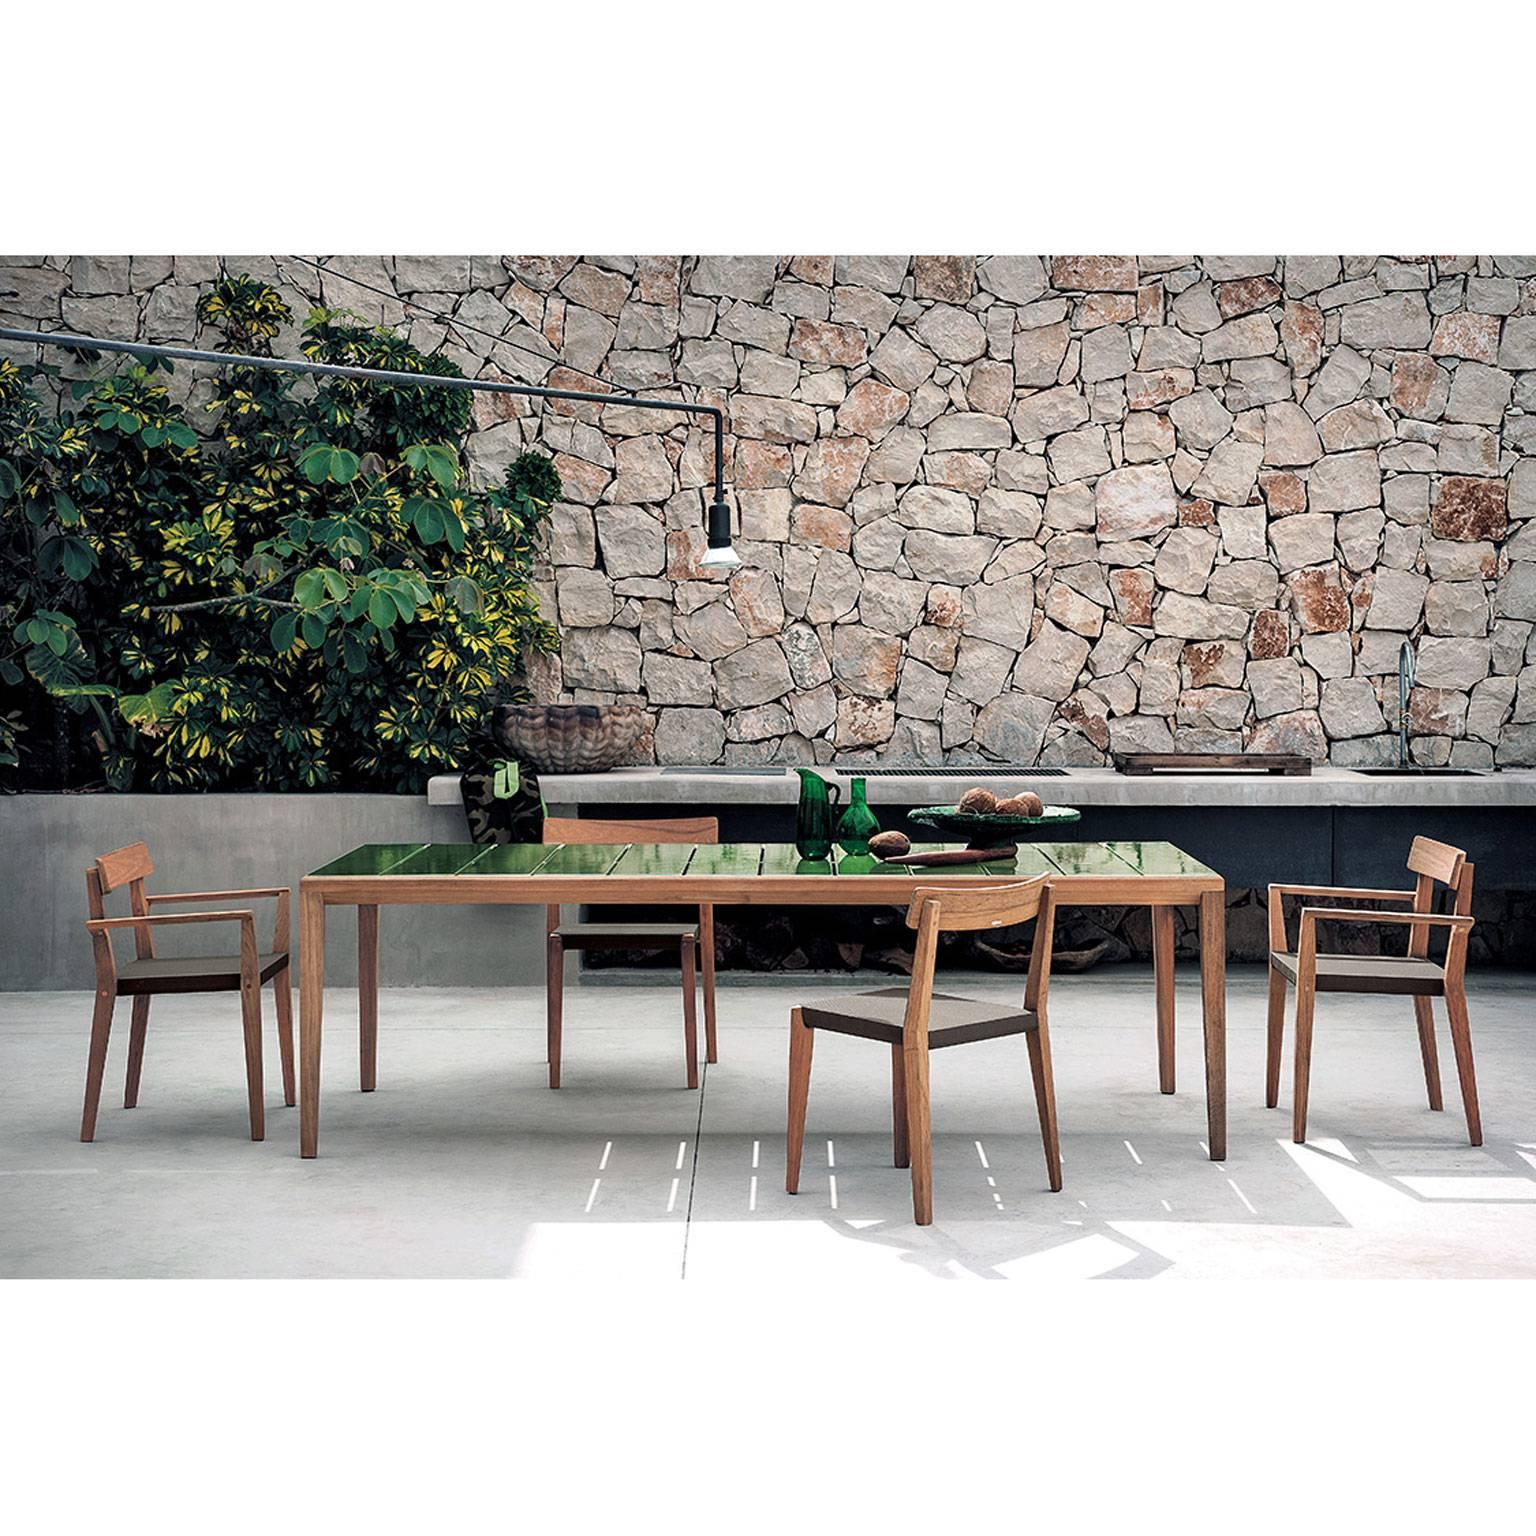 The Teka Roda collection includes the ability to innovate and match harmoniously natural materials and sophisticated technology, to create living and dining solutions original design. The collection is developed around a particular constructive